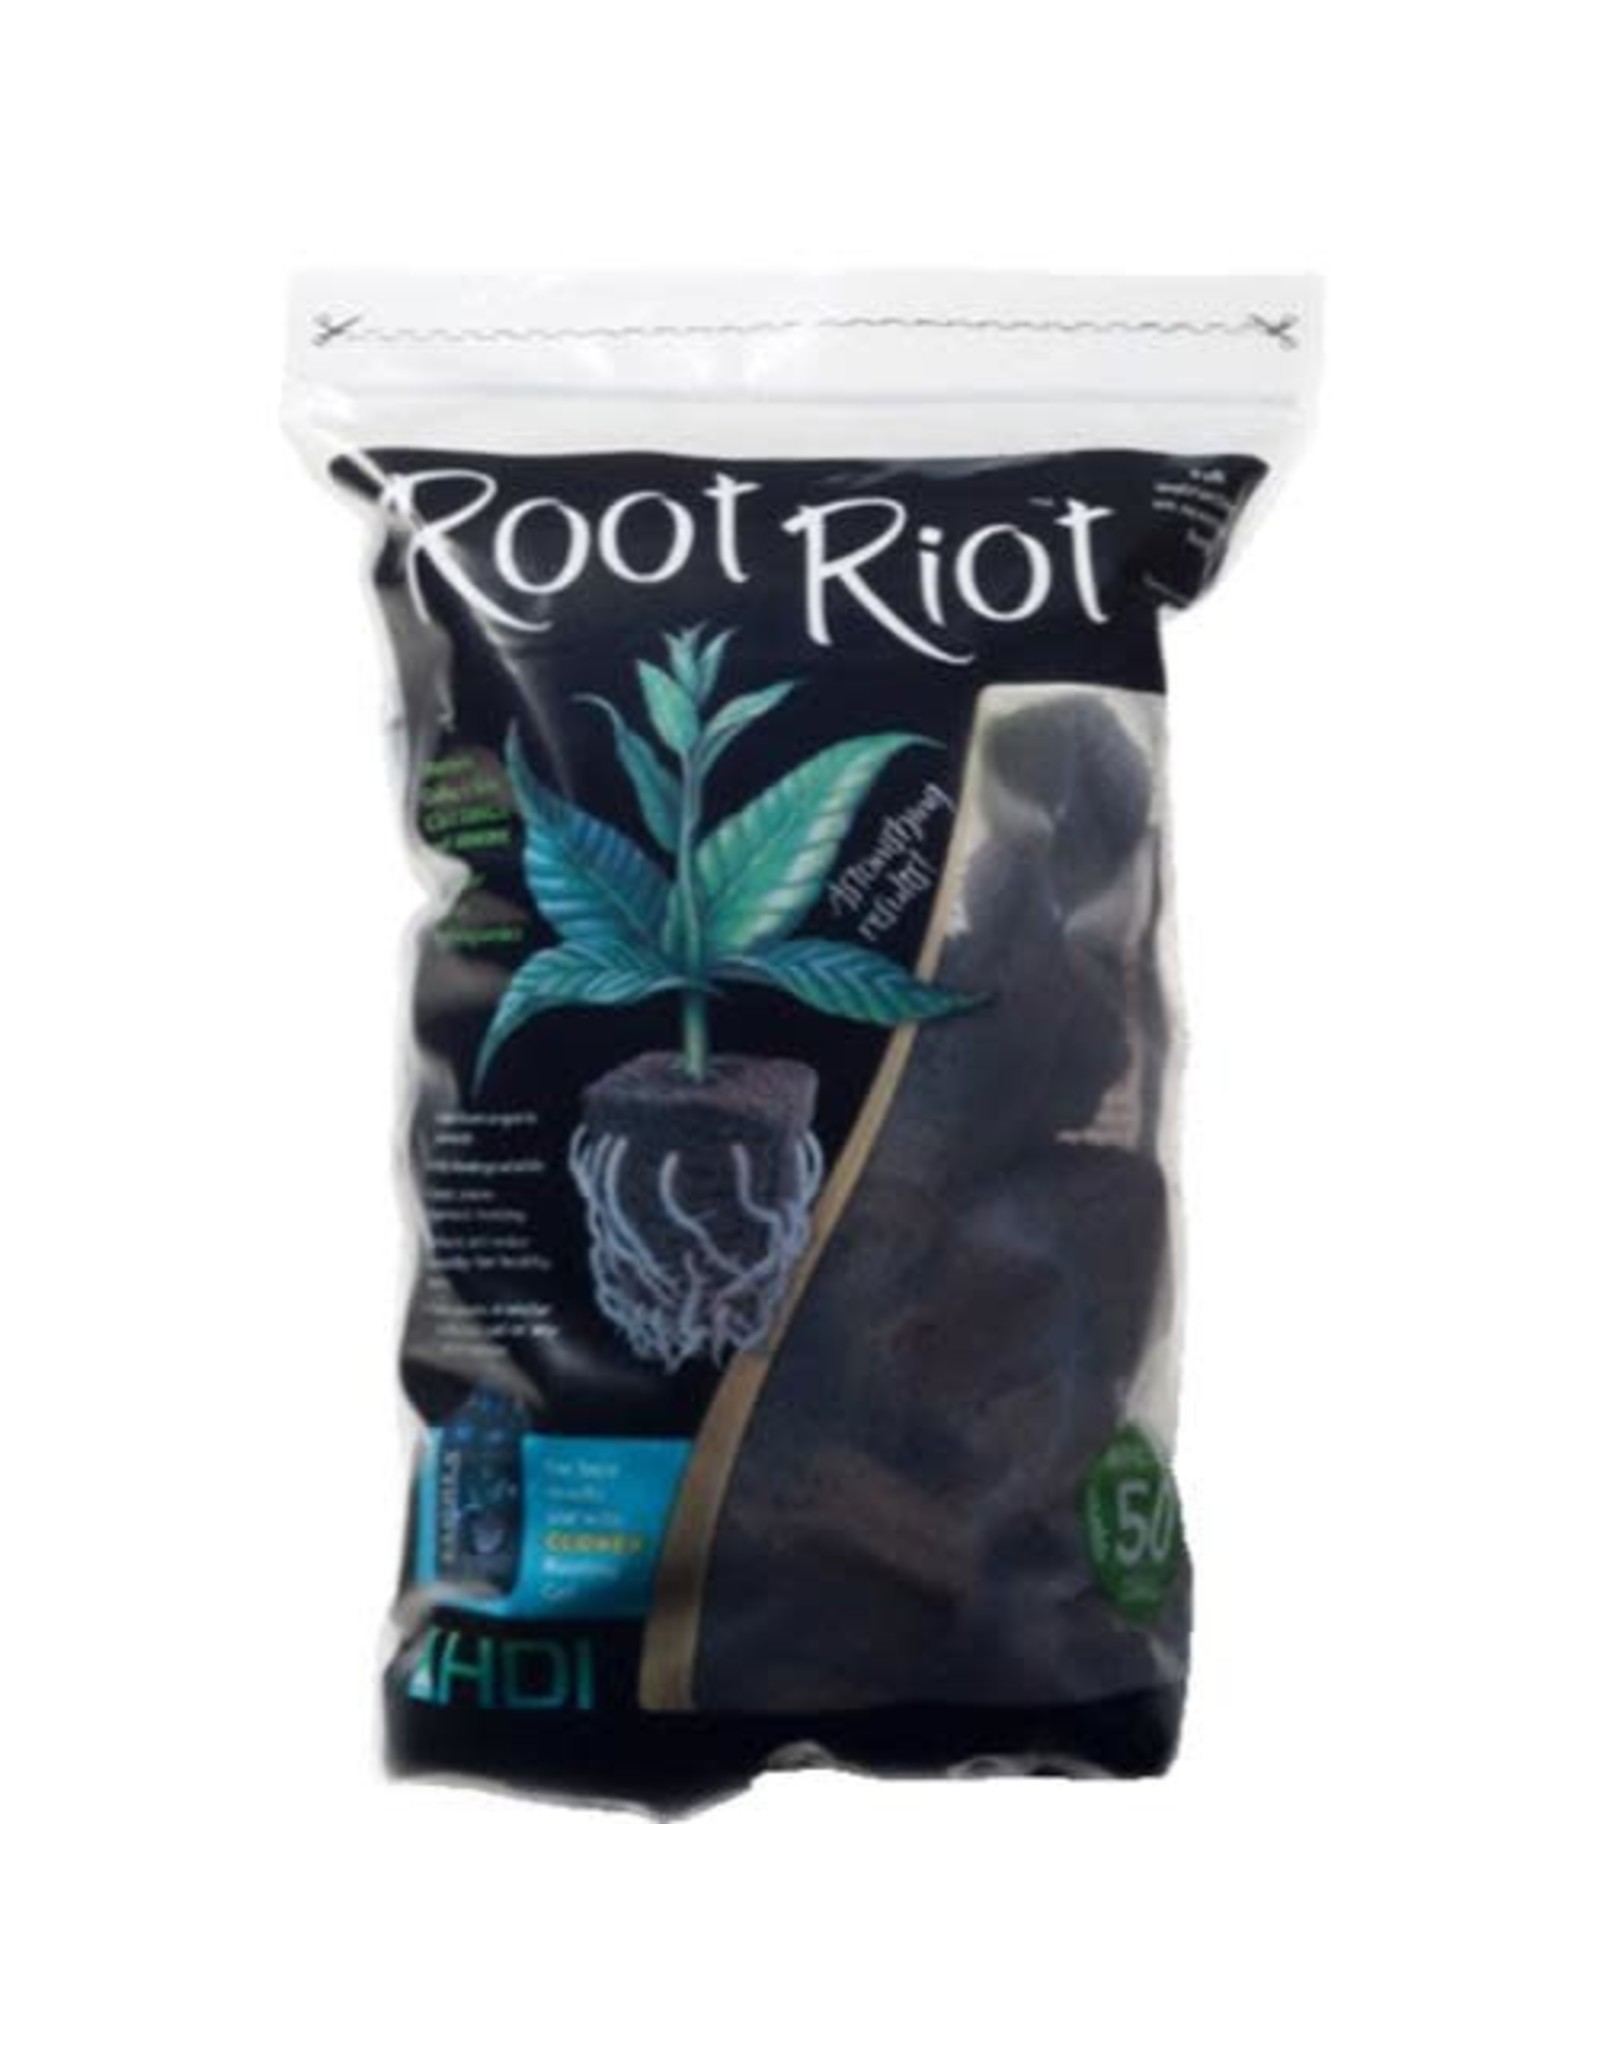 Hydrodynamics International Root Riot Replacement Cubes - 50 Cubes